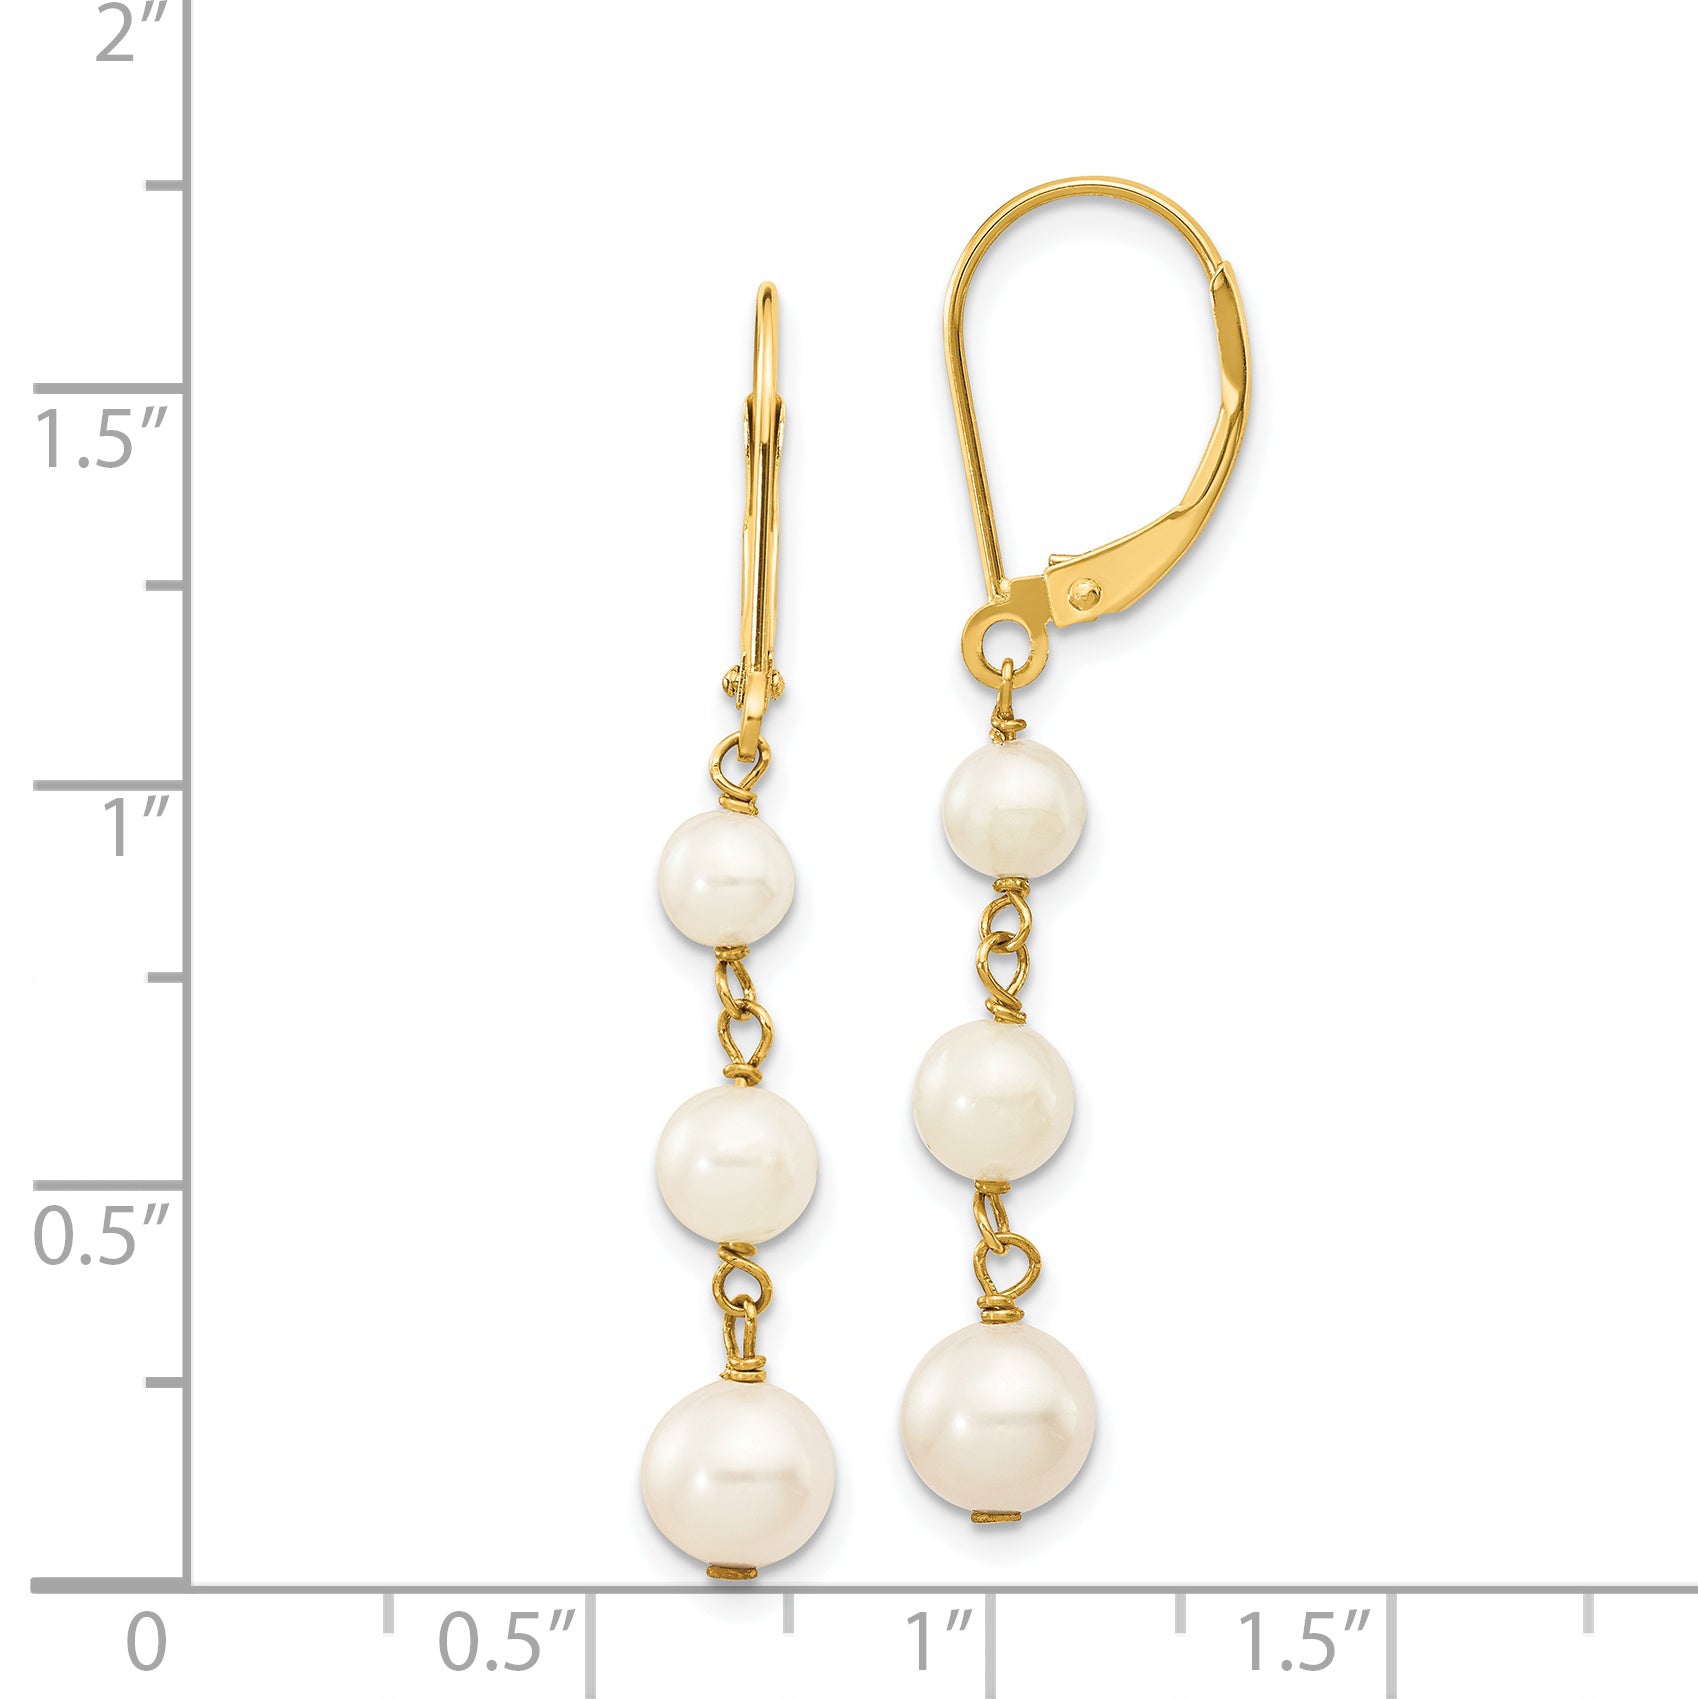 14k 4-6mm White Semi-round FW Cultured Pearl Gaduated Leverback Earrings